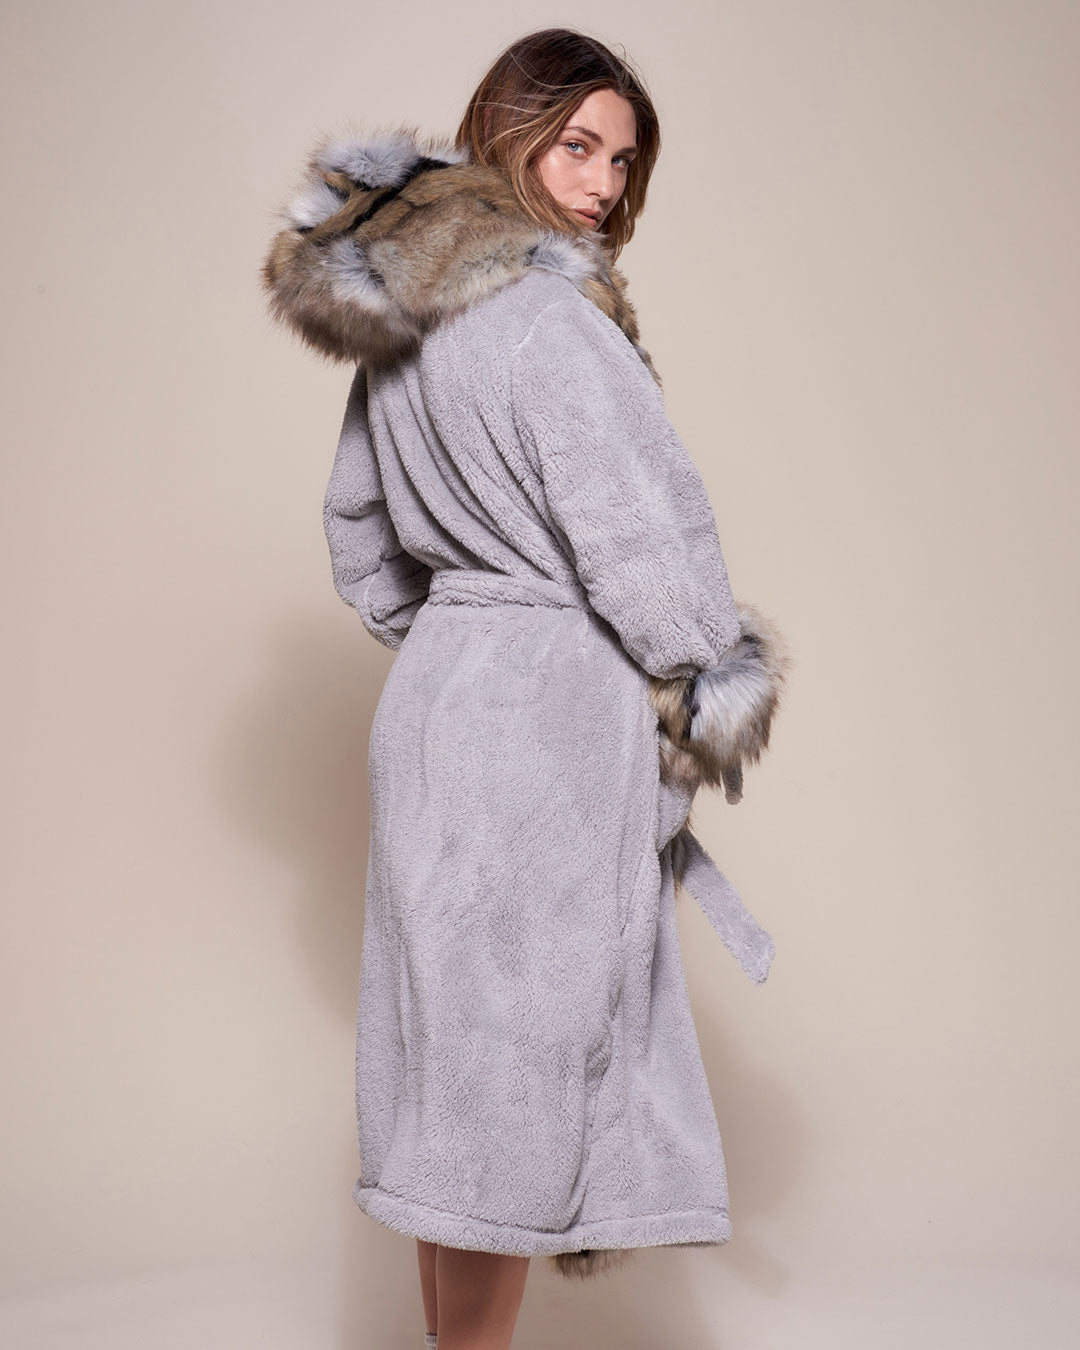 Back View of Wolverine Faux Fur Robe with Hood